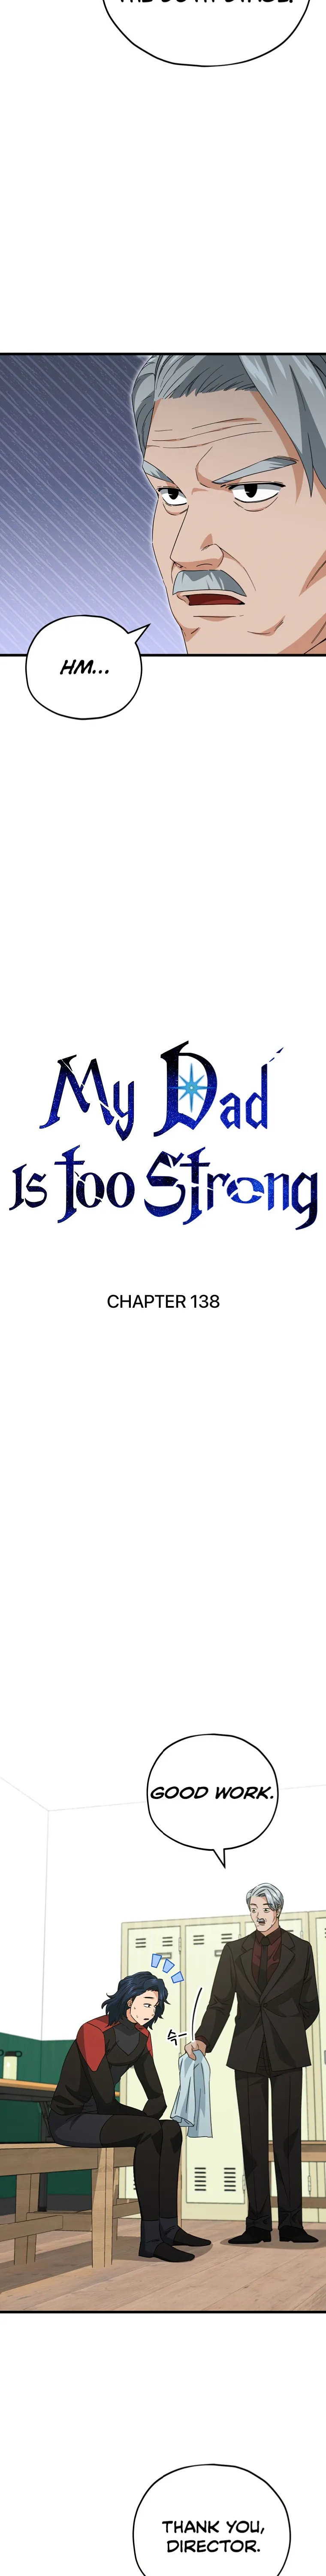 My Dad Is Too Strong chapter 138